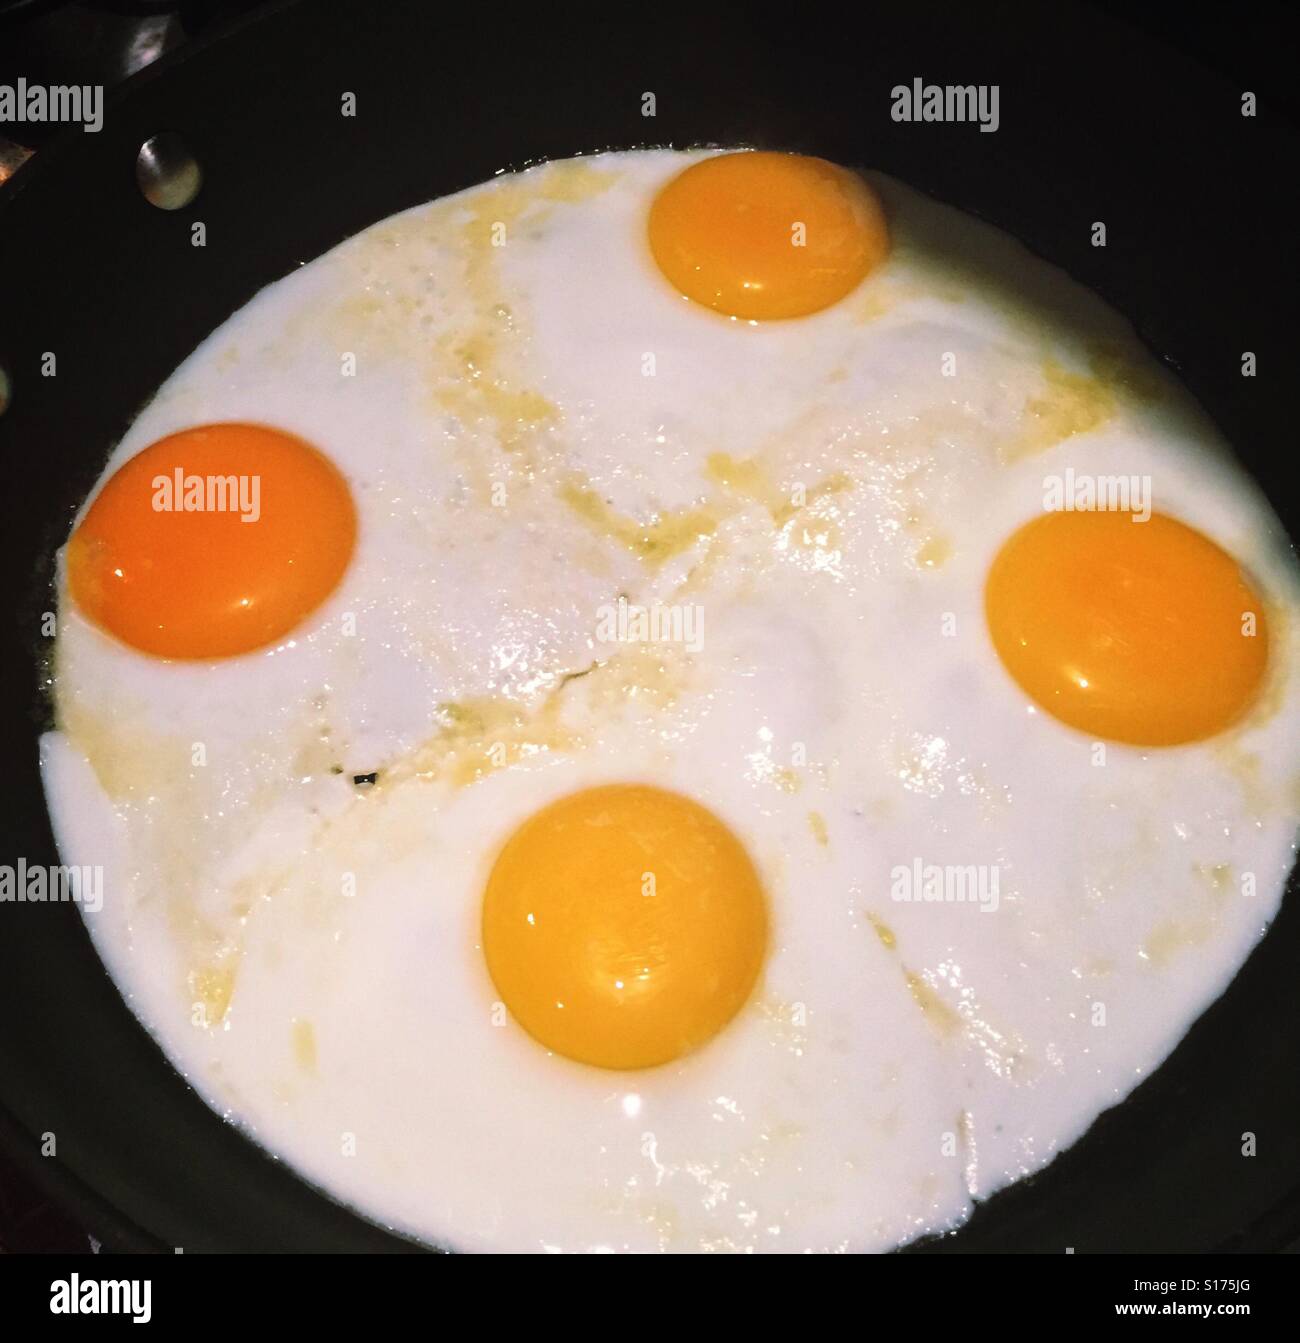 Four over easy eggs are cooking in a stovetop skillet. Stock Photo